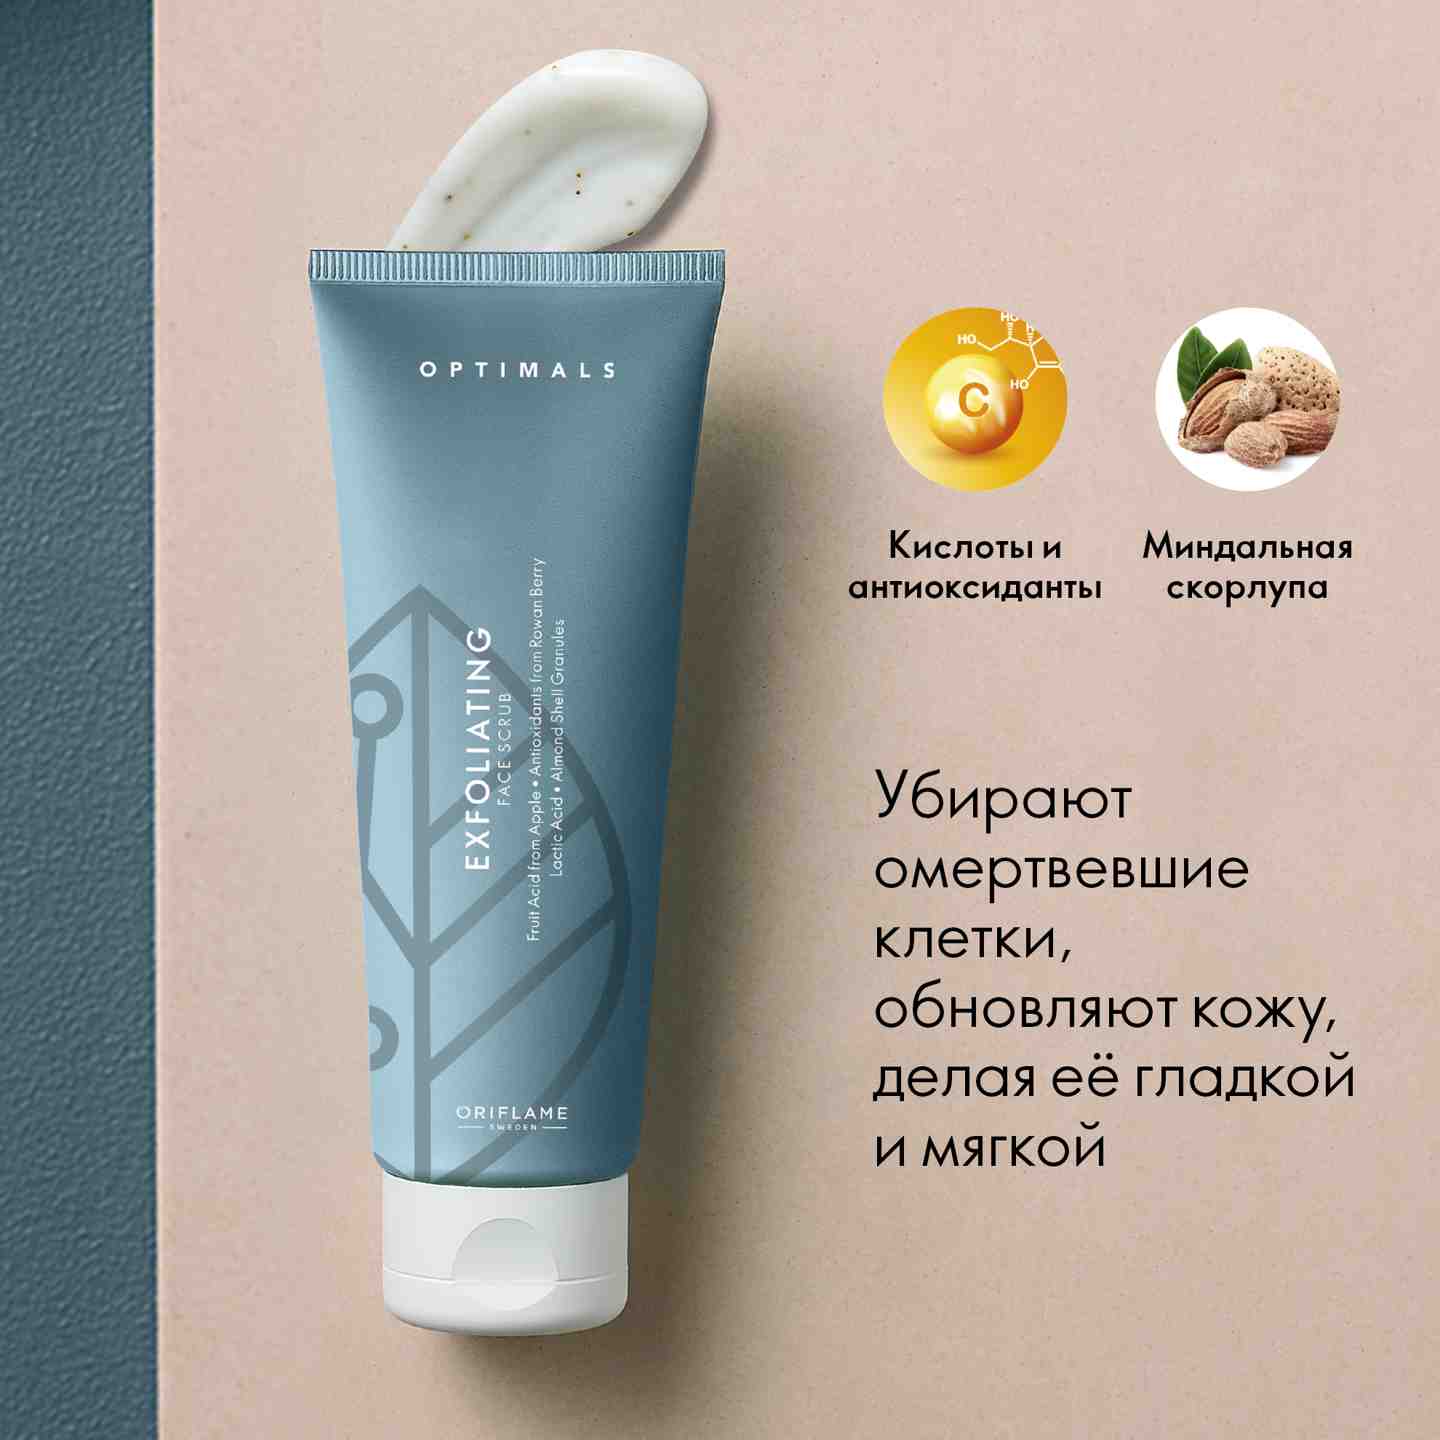 https://media-cdn.oriflame.com/productImage?externalMediaId=product-management-media%2fProducts%2f42614%2fBY%2f42614_3.png&id=15350875&version=1